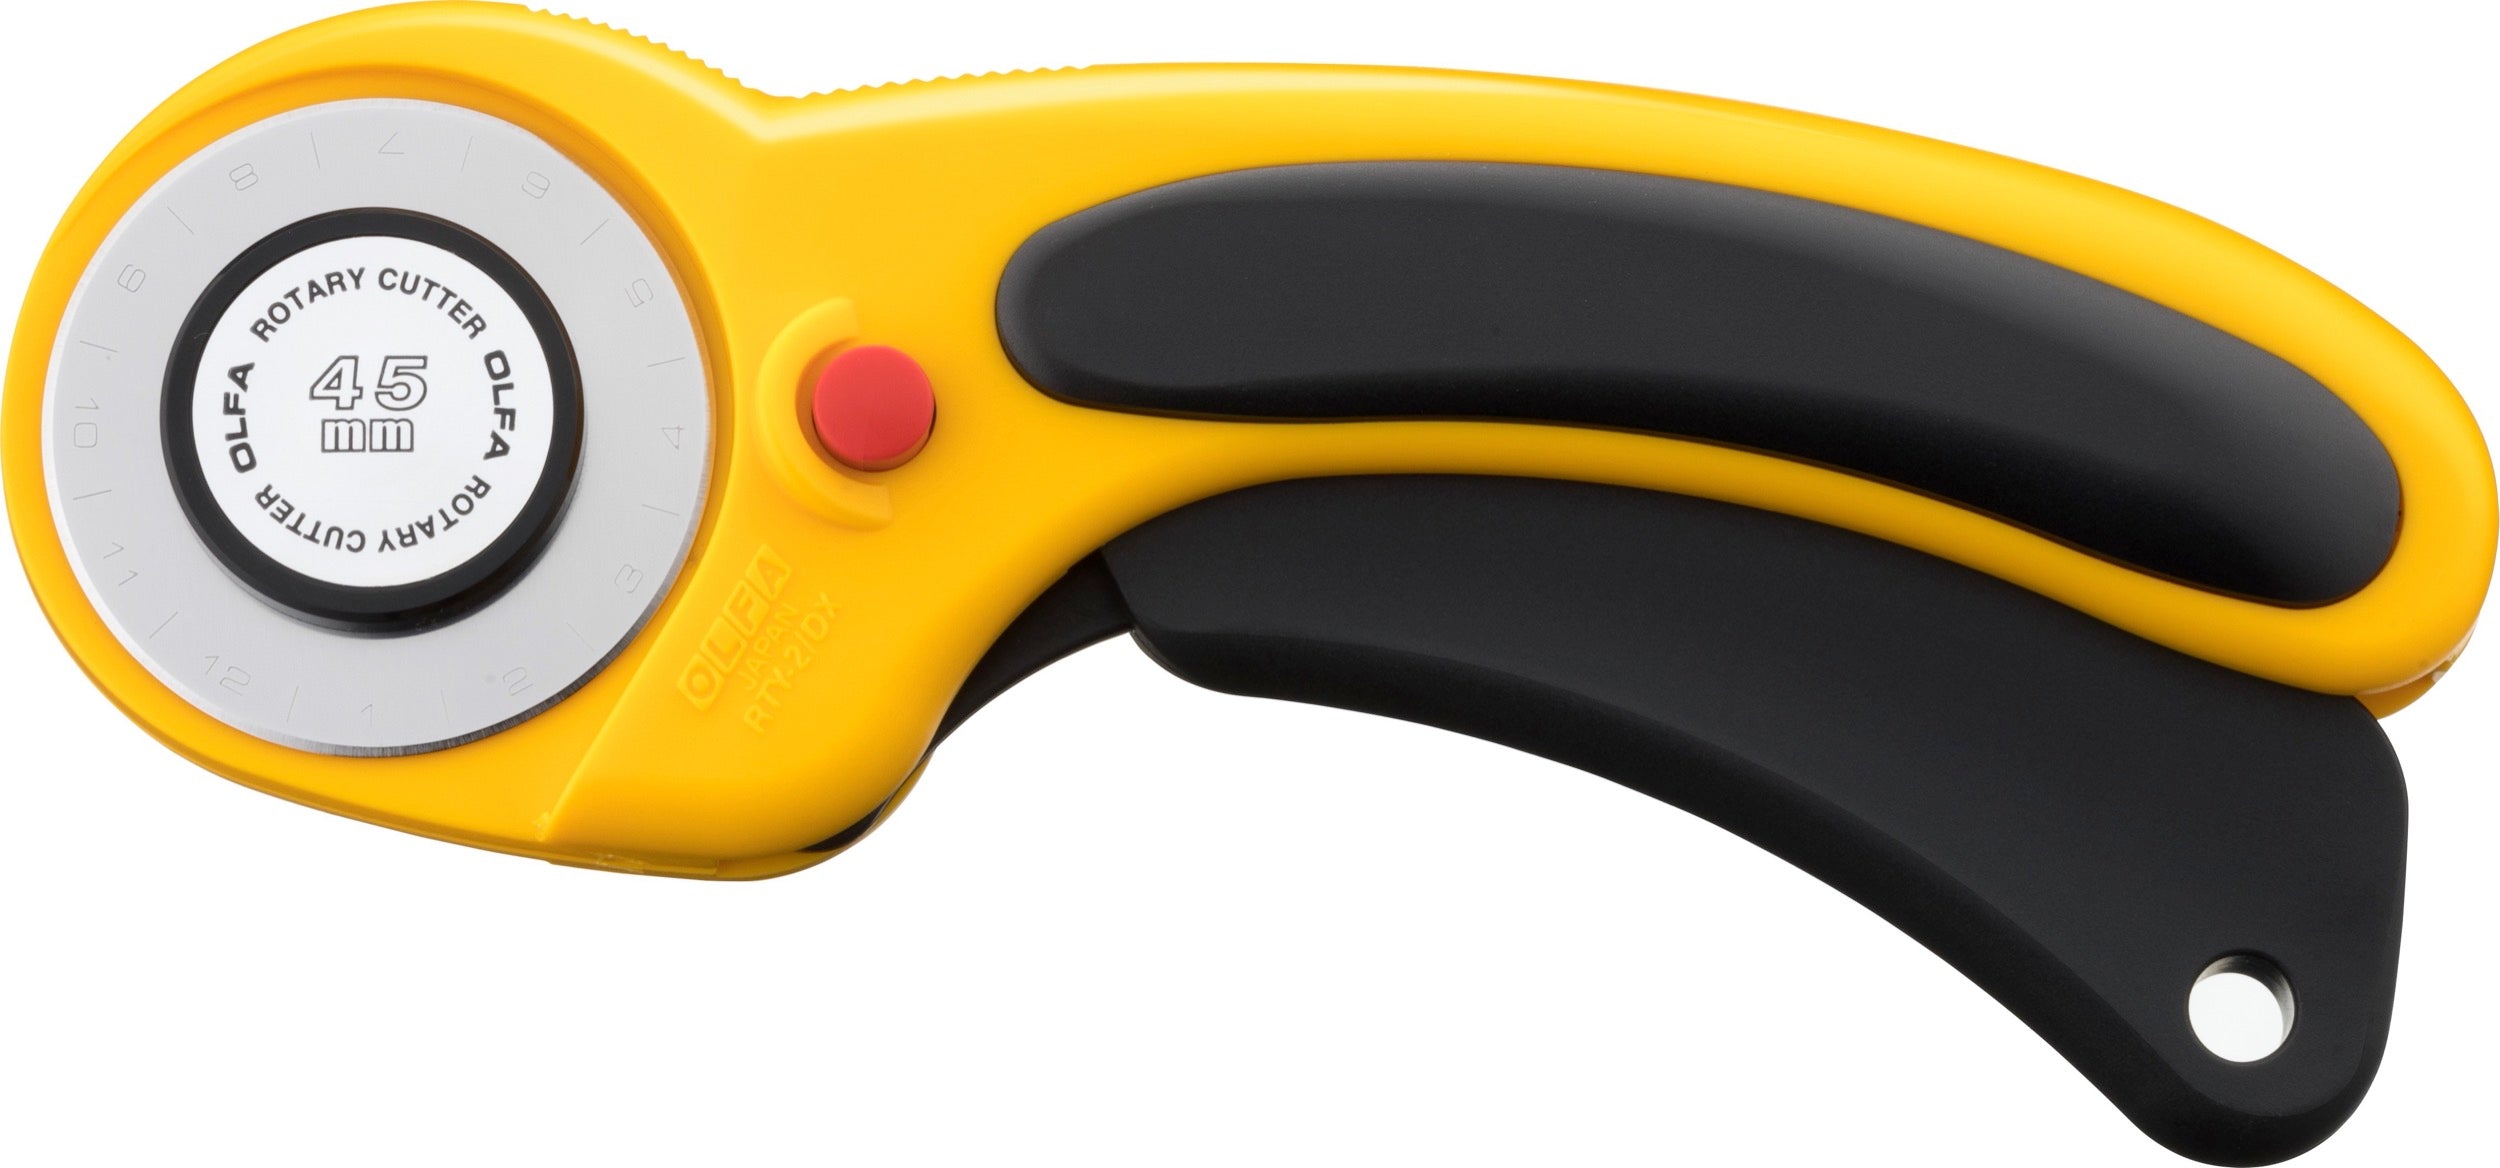 OLFA branded rotary cutter in the deluxe ergonomic 45mm size RTY-2/DX